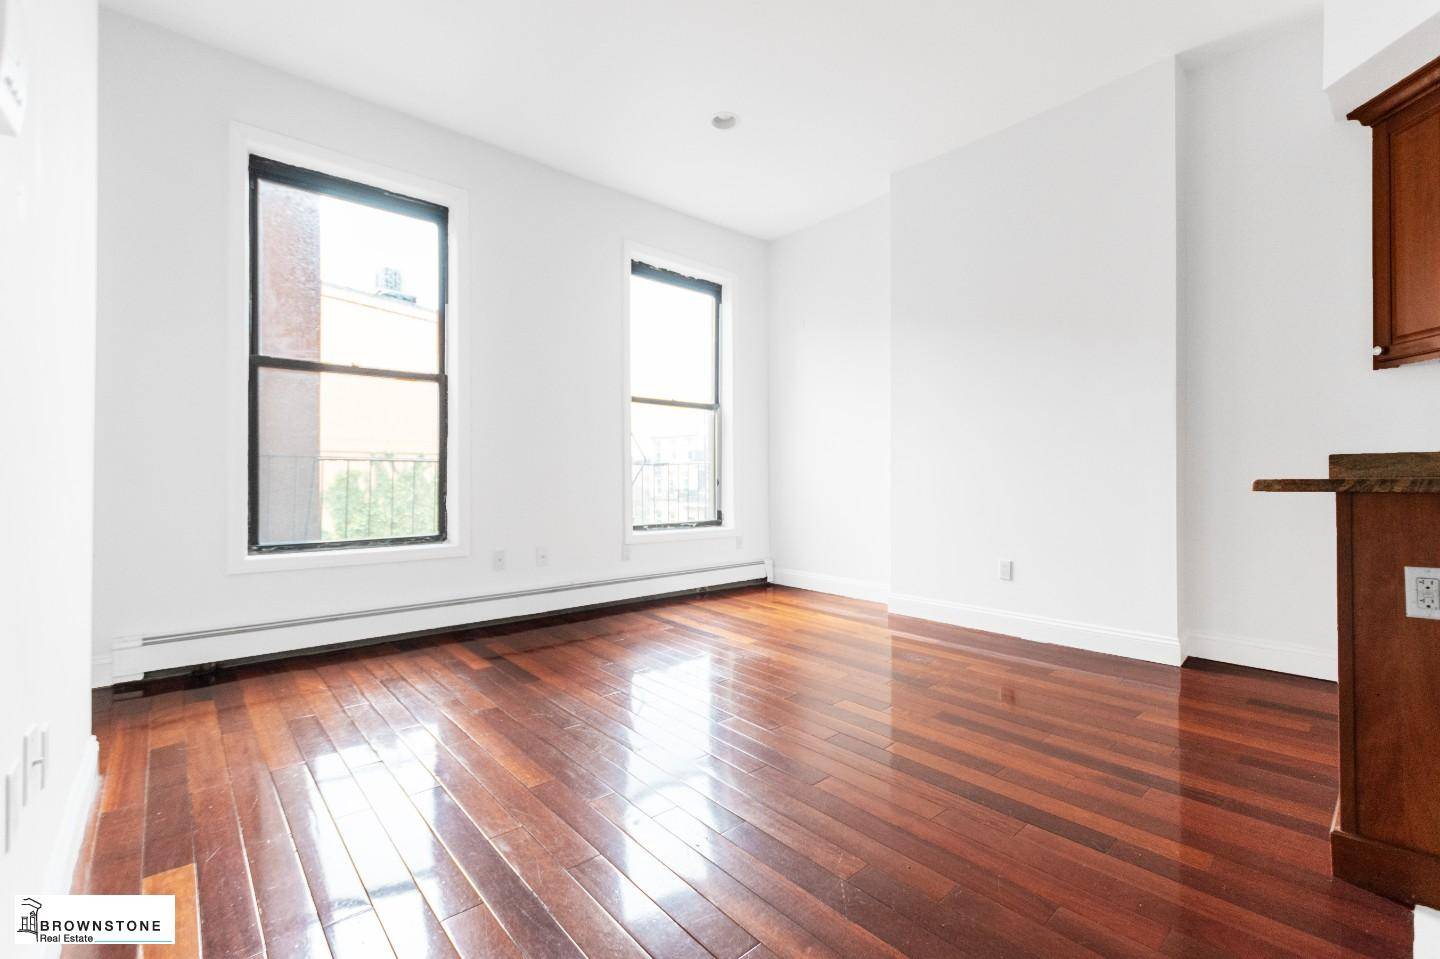 606 Henry Street is a rare offering in the Carroll Gardens market.